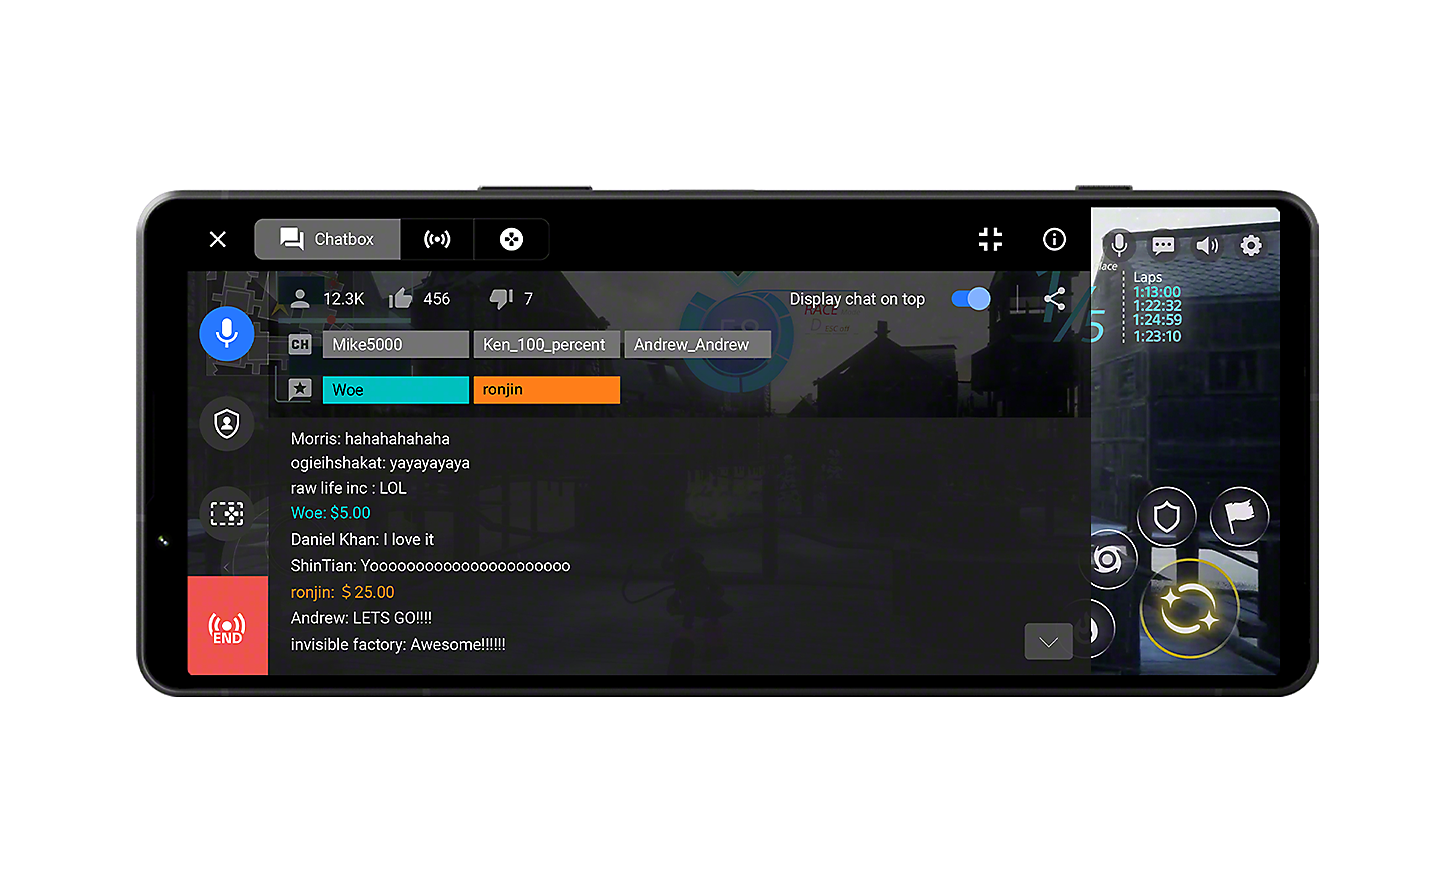 Gaming screen on Xperia 1 V showing the chatbox UI